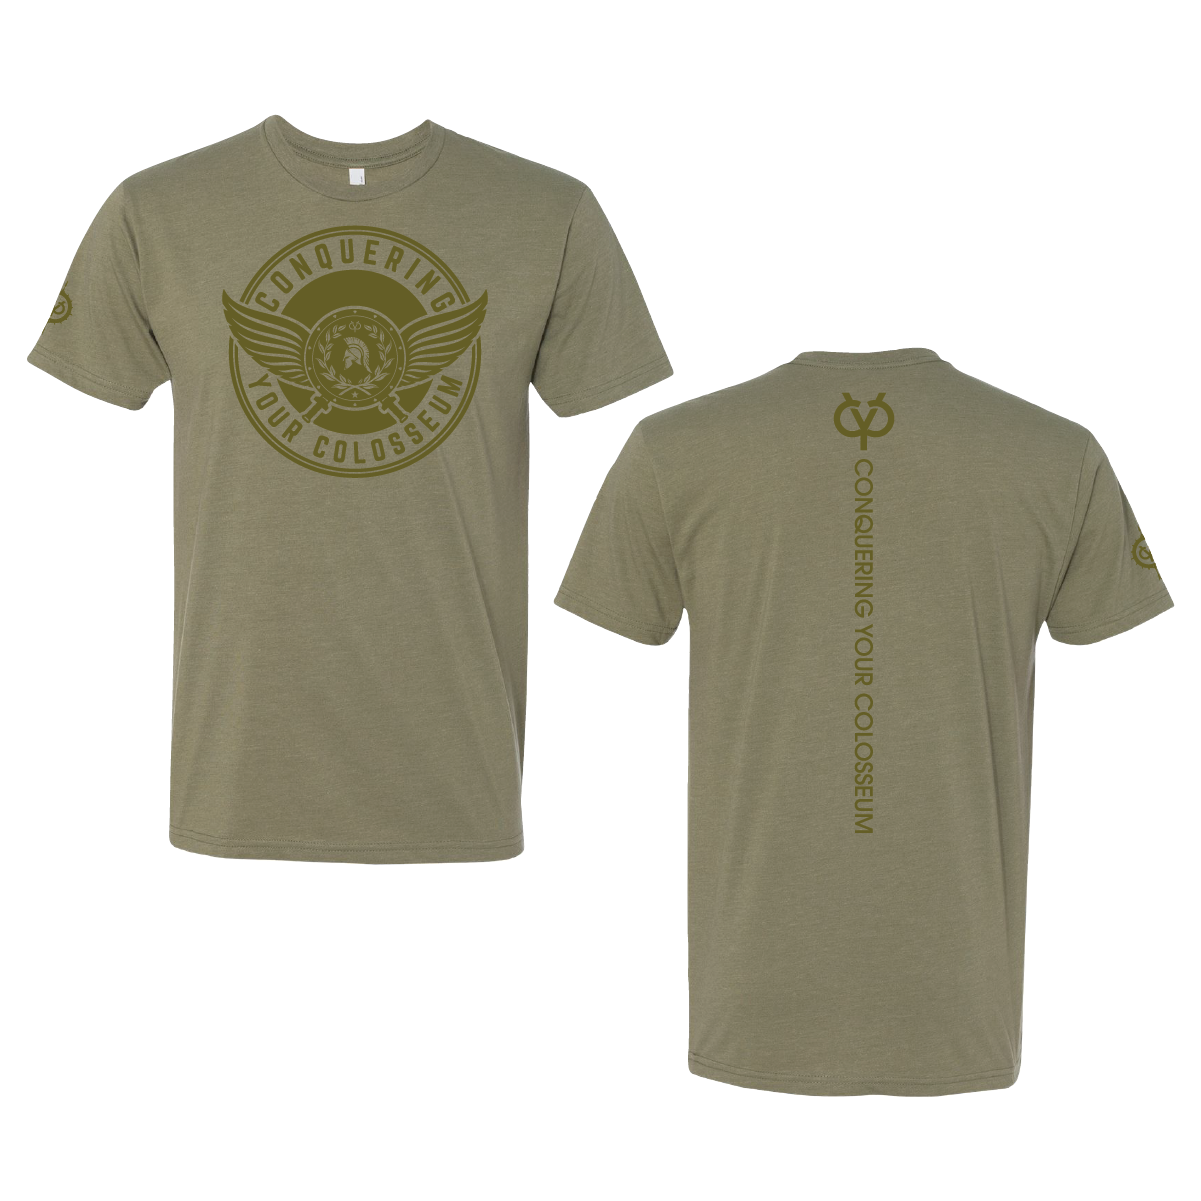 Winged Medallion CYC Conquering - Adult Tee